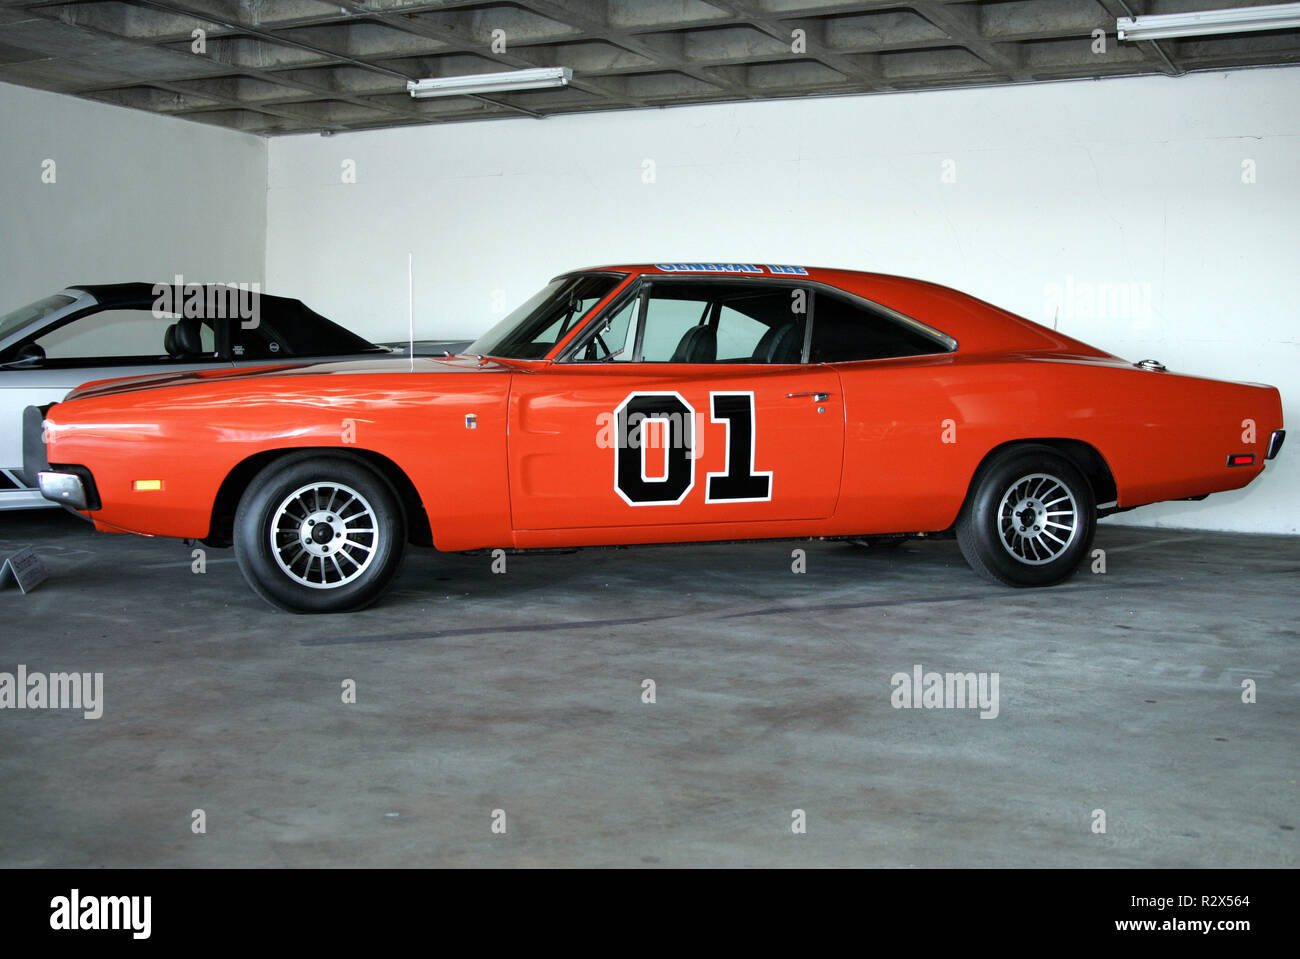 1969 DODGE CHARGER (THE GENERAL LEE FROM THE DUKES OF HAZZARD) GEORGE  BARRIS COLLECTION PETERSEN MUSEUM LOS ANGELES USA 13 May Stock Photo - Alamy